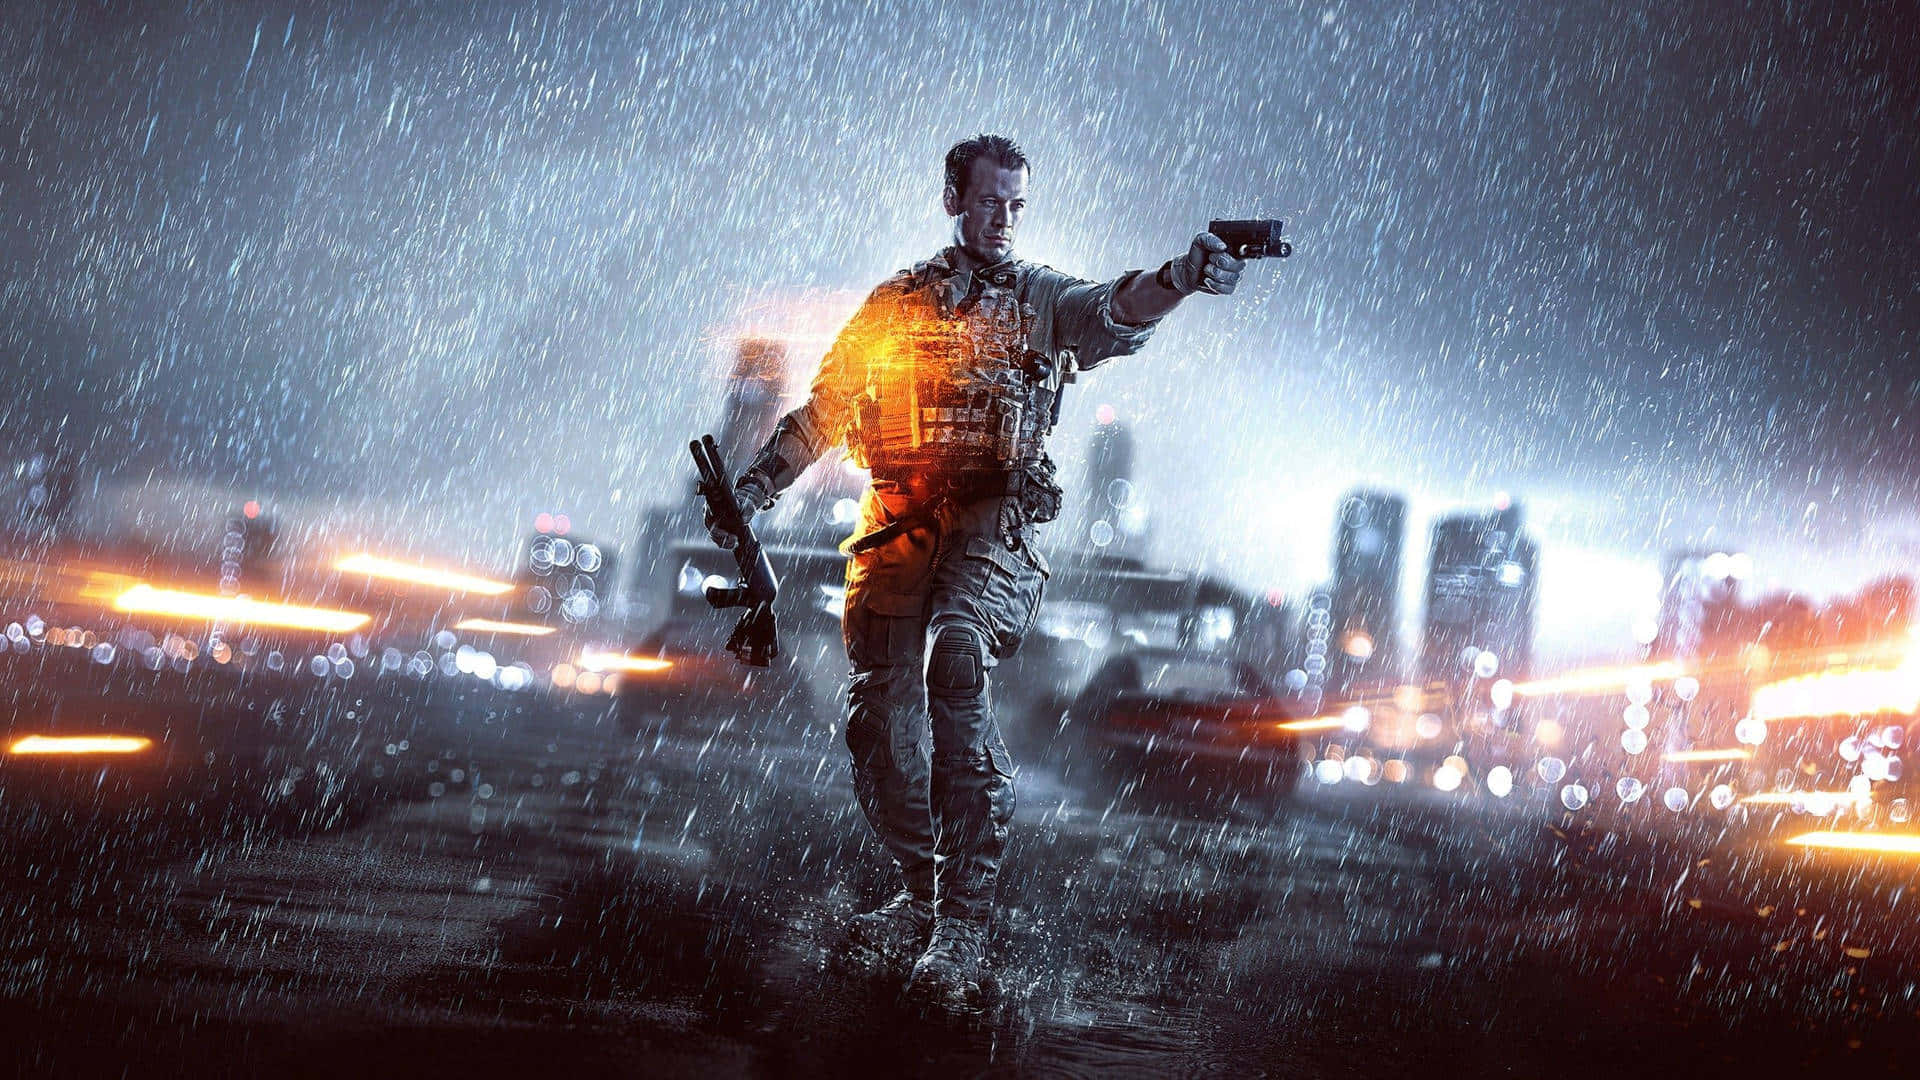 Experience Battlefield 4 in high definition with this ultra HD wallpaper.